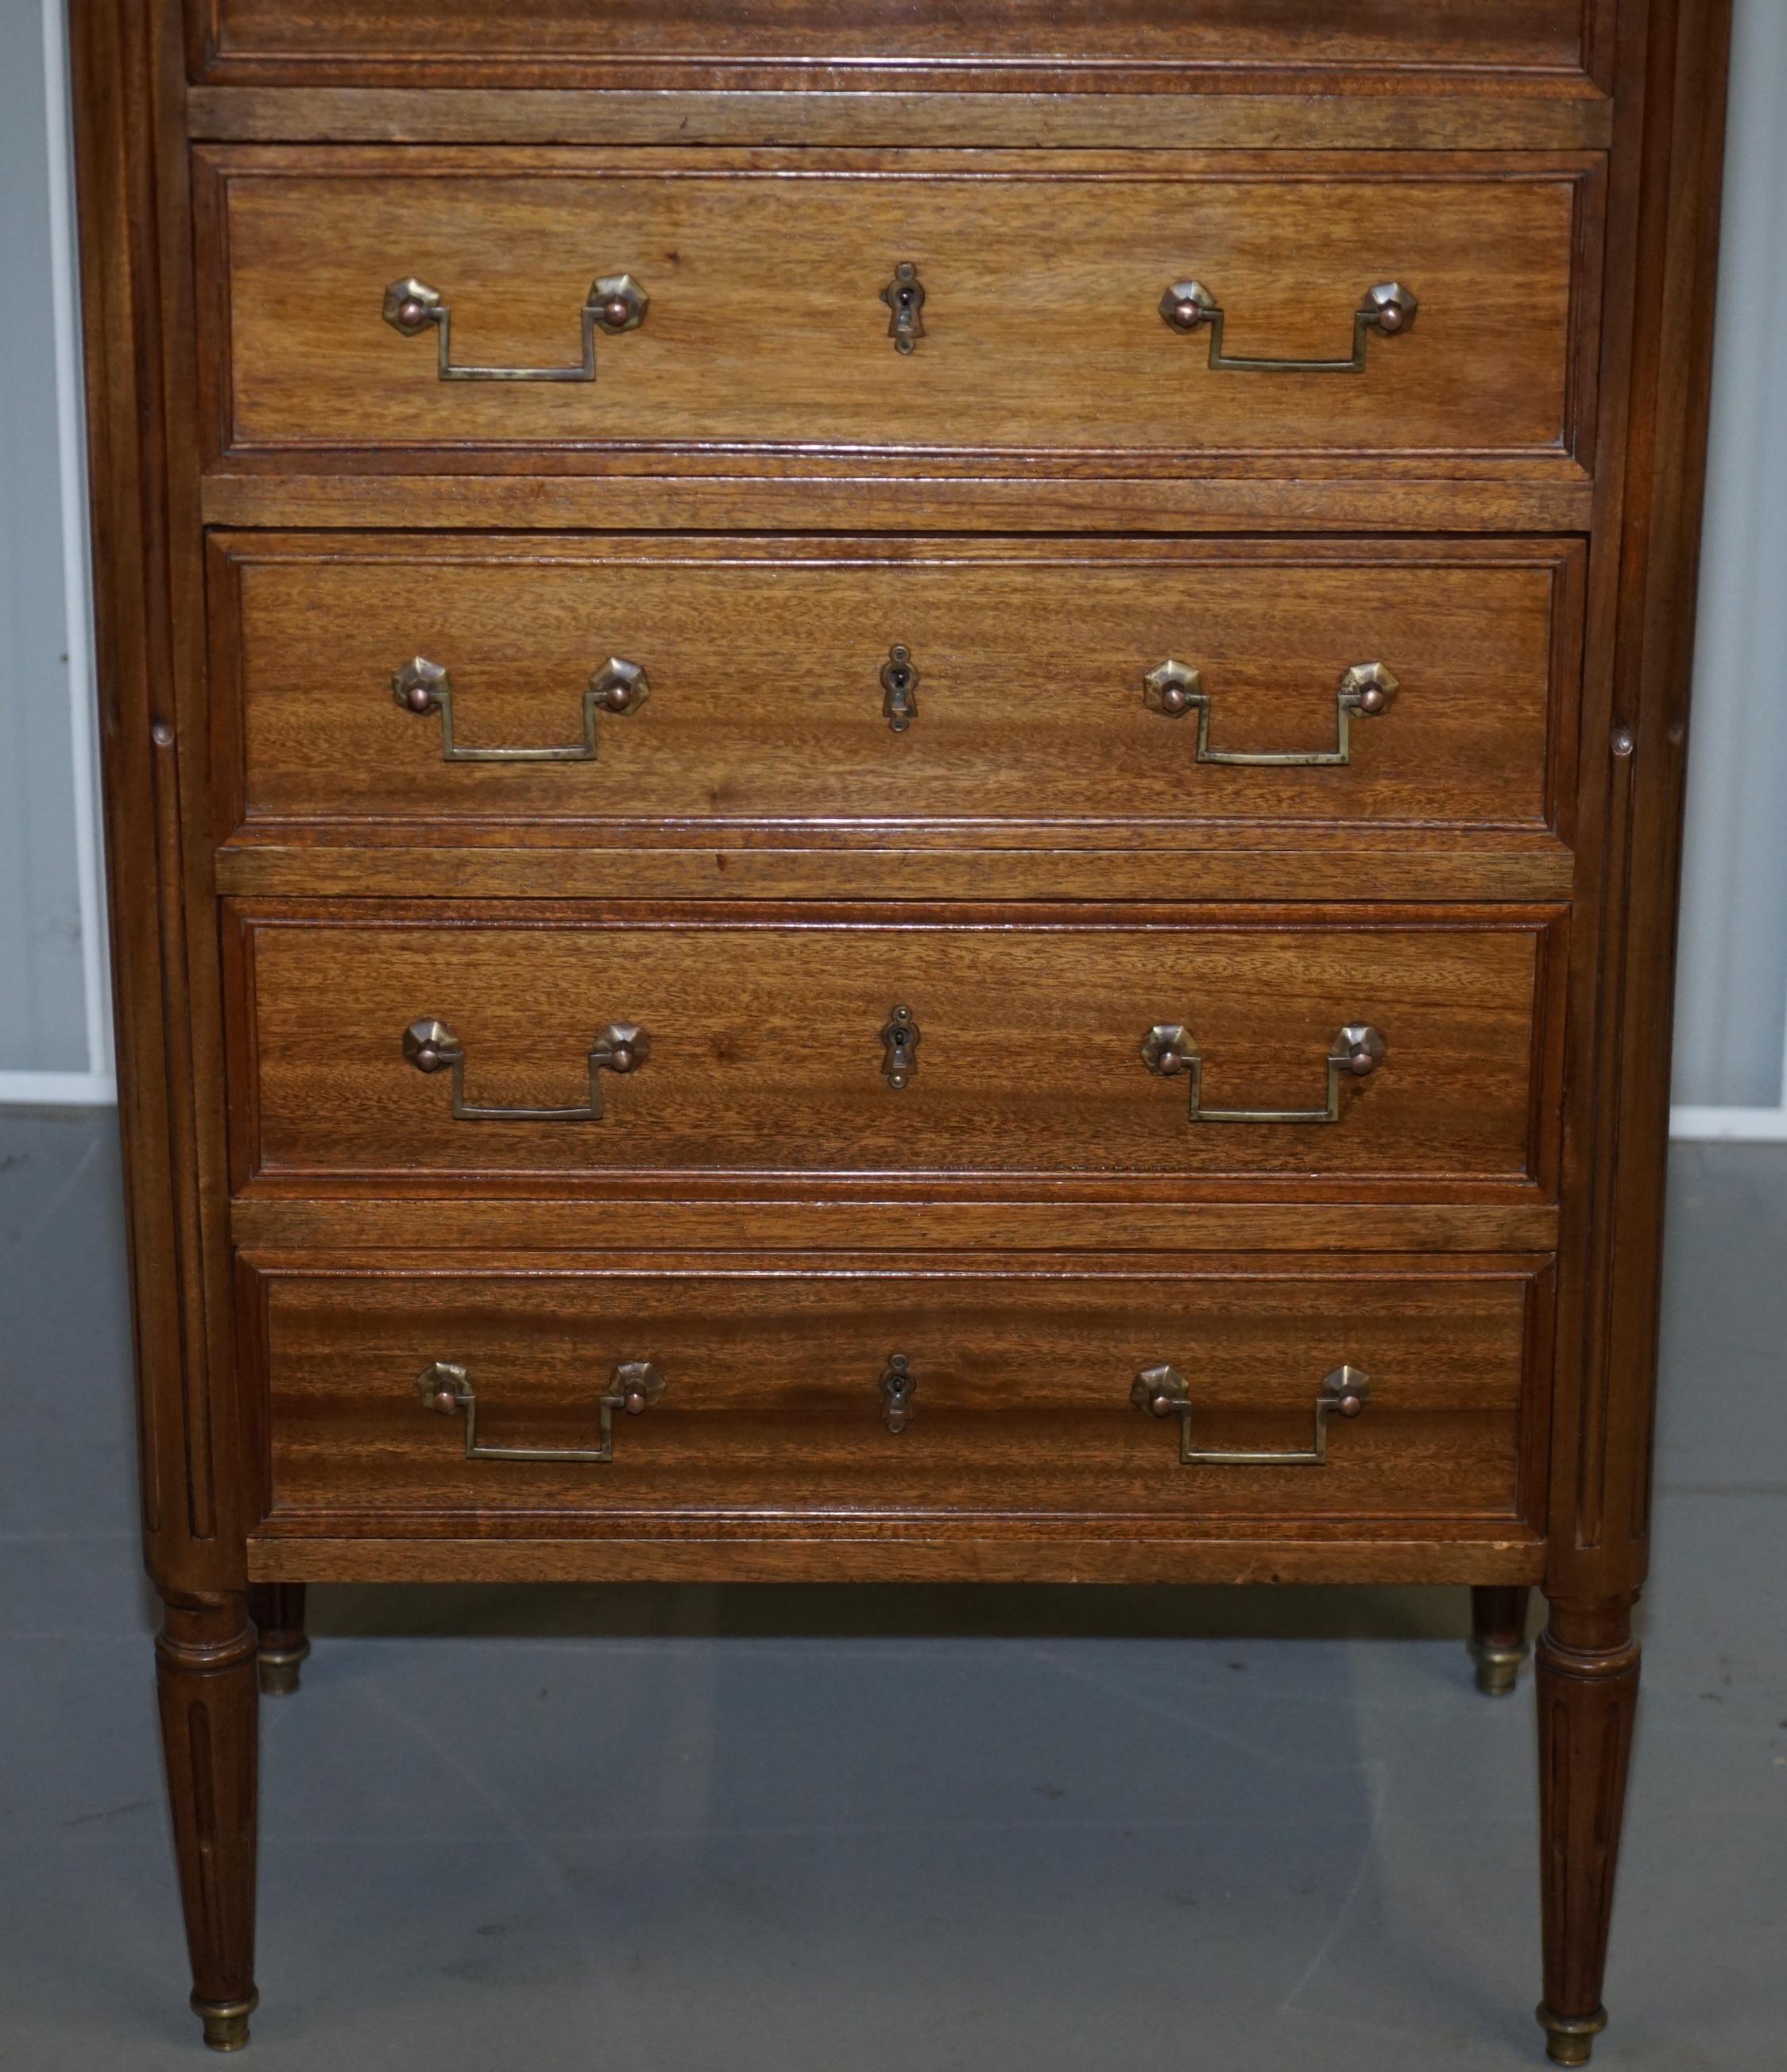 Rare 19th Century French Marble Topped Brass Gallery Semainier Chest of Drawers For Sale 4